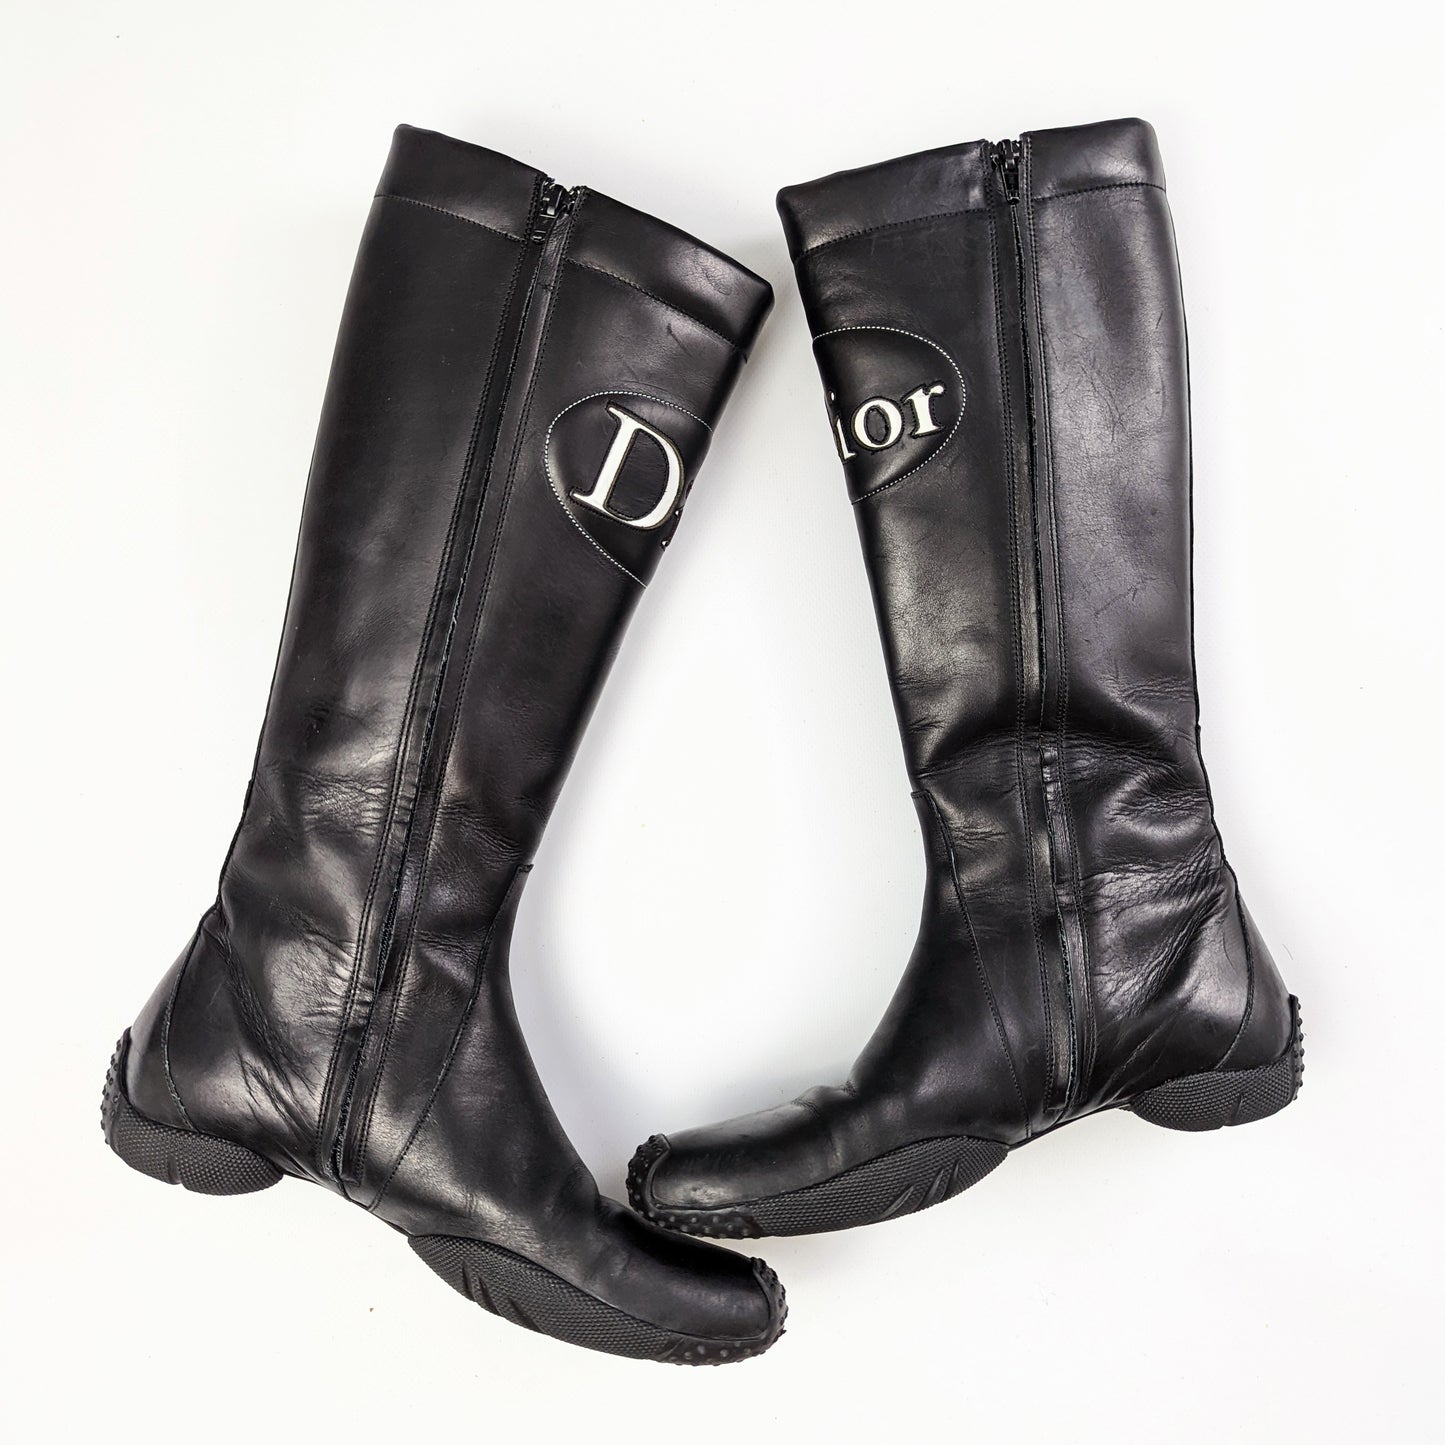 Dior sports leather boots - T38